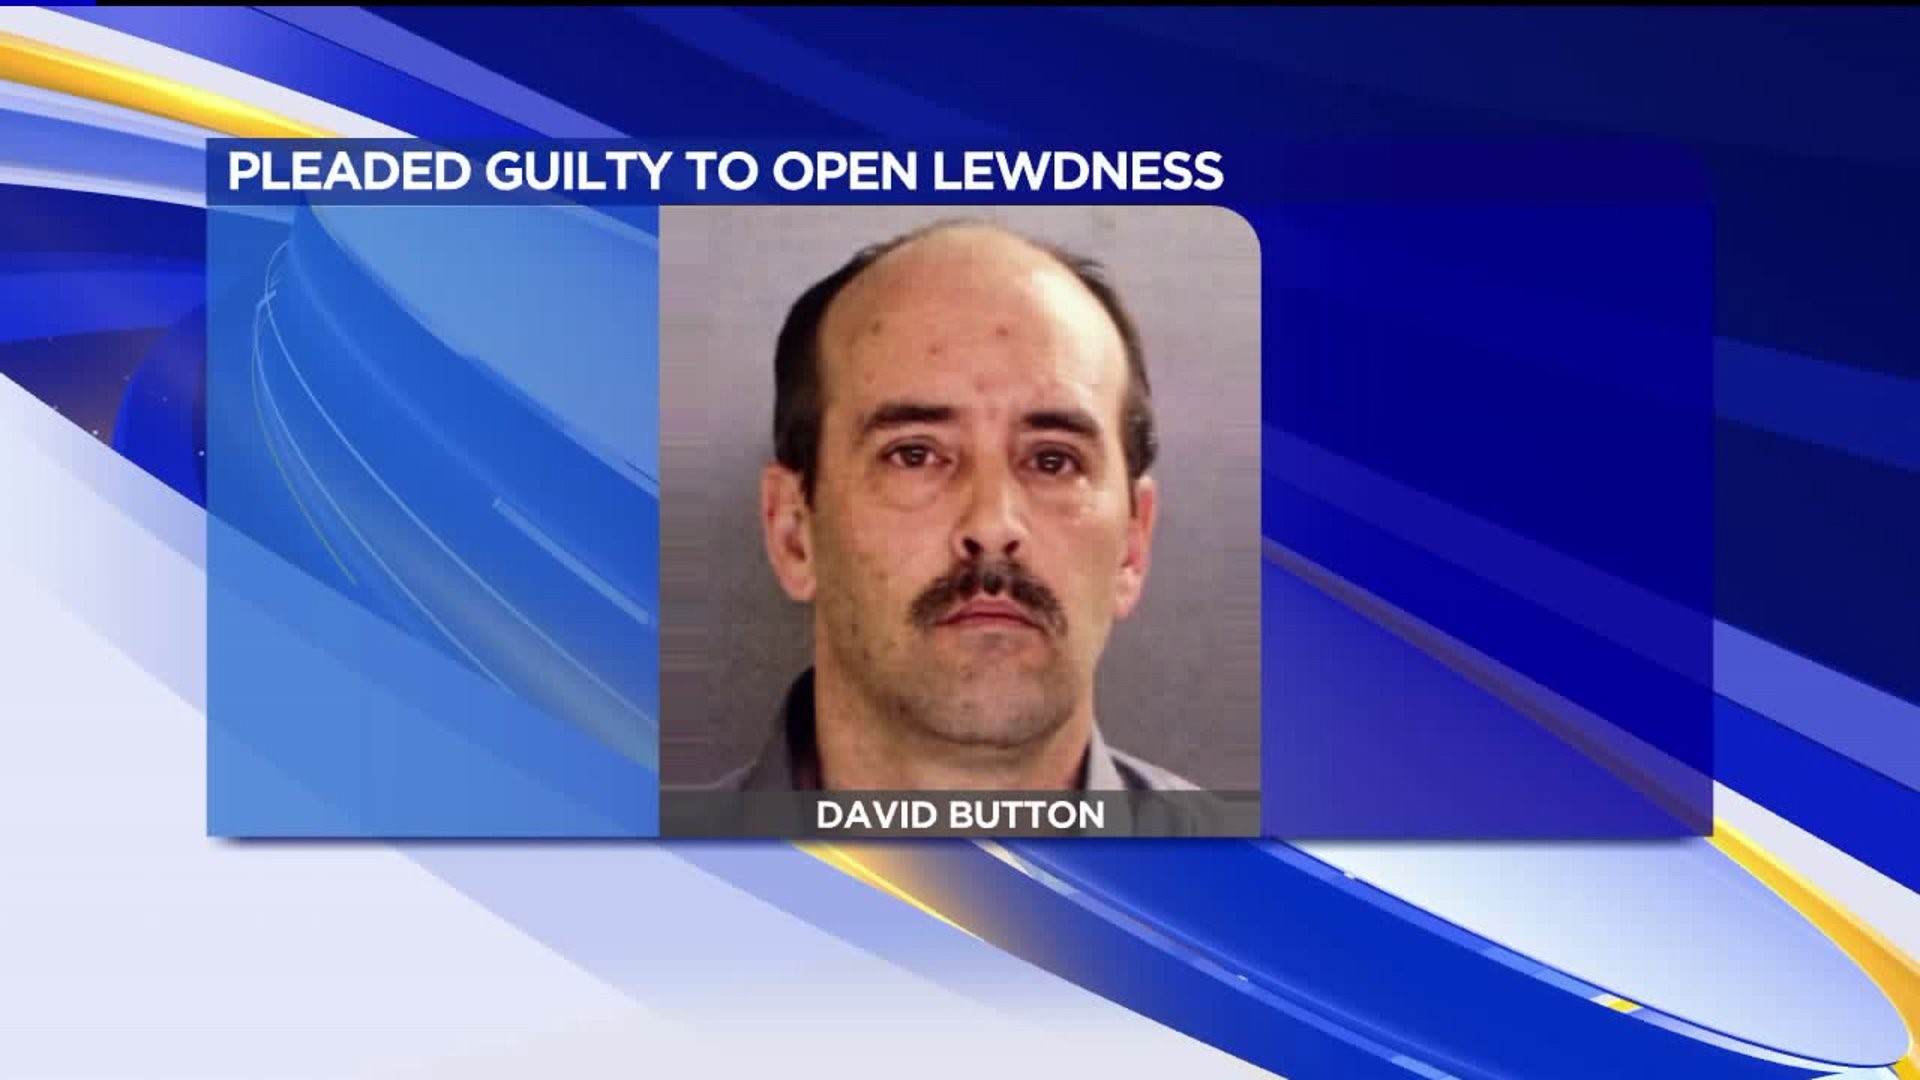 Man Admits to Open Lewdness with Children